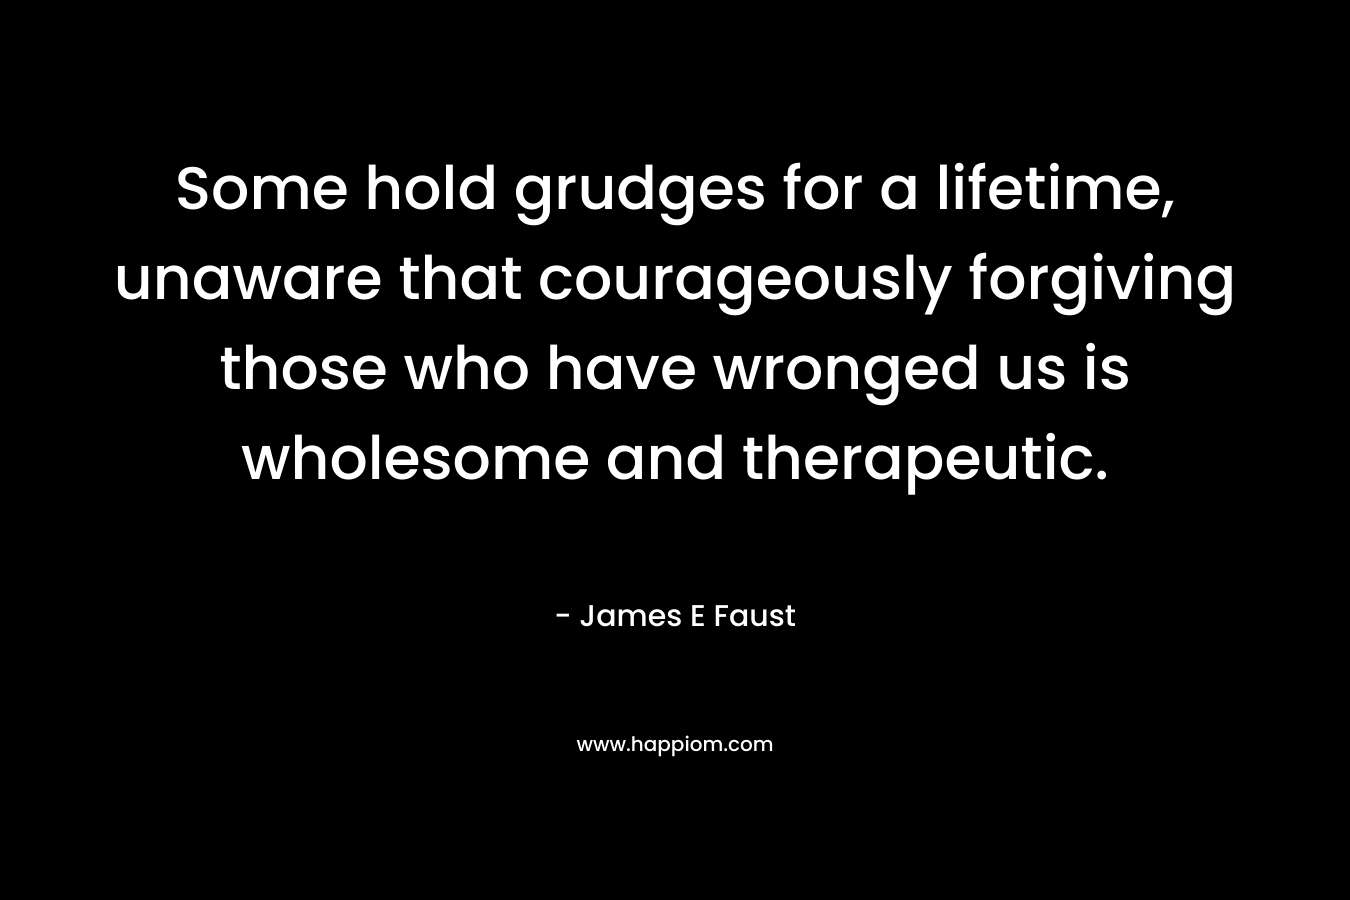 Some hold grudges for a lifetime, unaware that courageously forgiving those who have wronged us is wholesome and therapeutic.